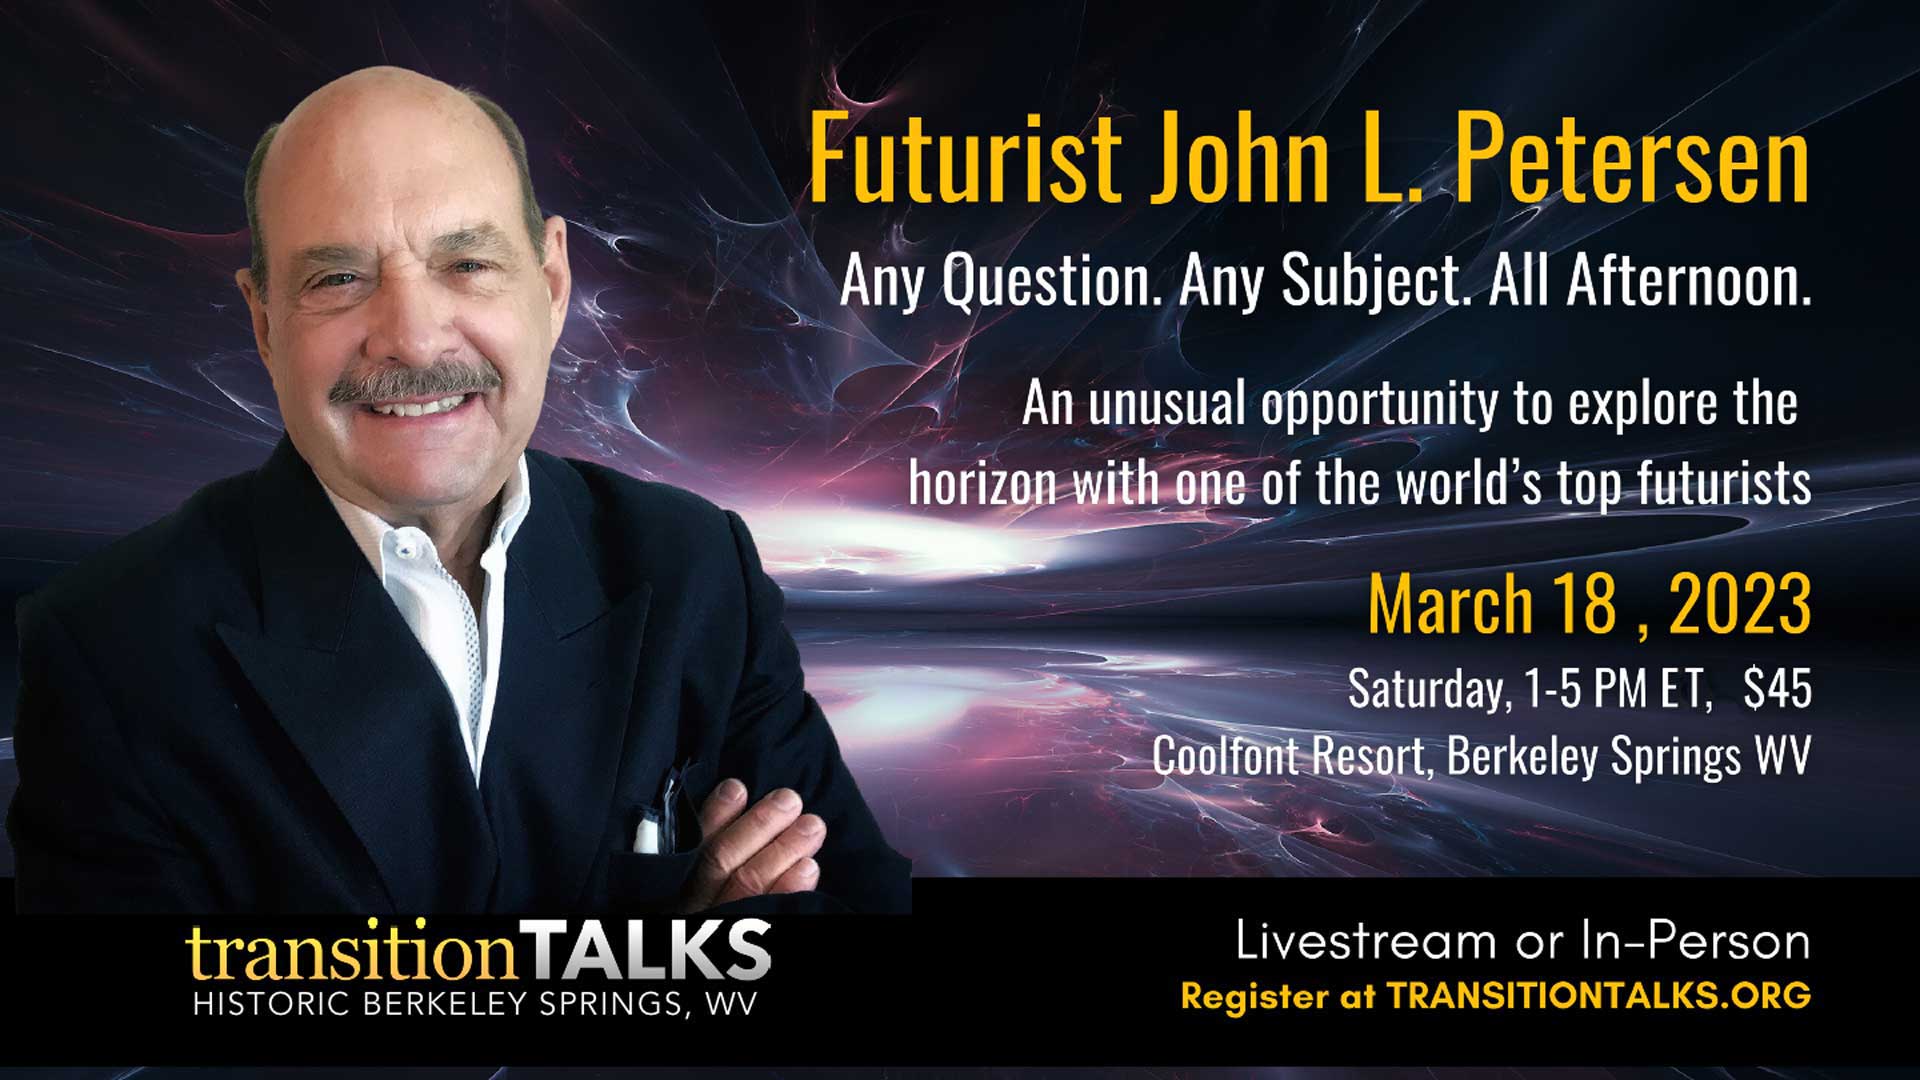 Futurist John L. Petersen. An unusual opportunity to explore the horizon with one of the world's top futurists.